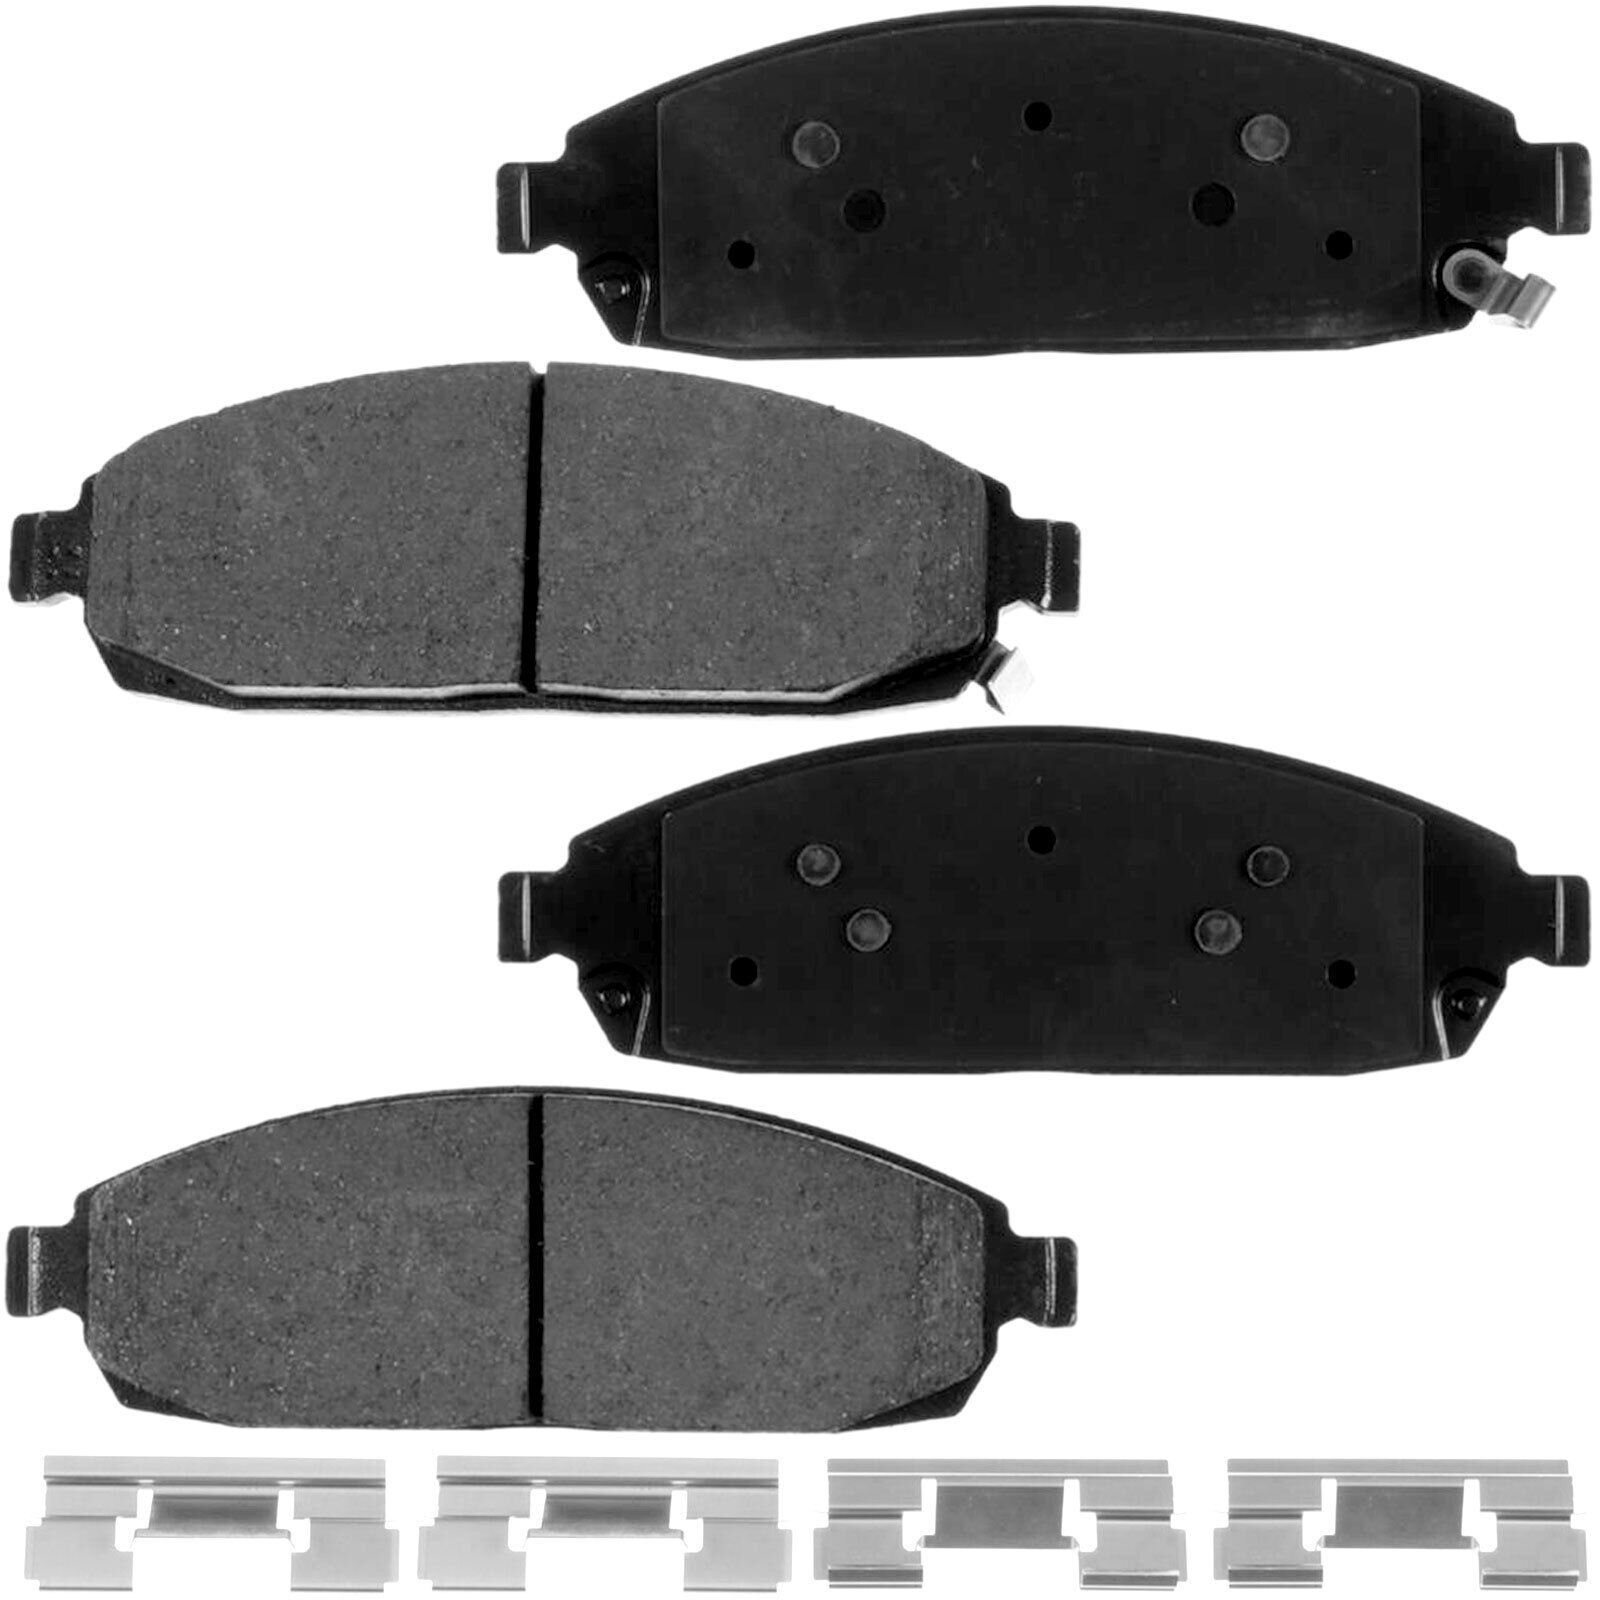 Front brake pads For Jeep 2006-2010 Commander 2005-2006 Grand Cherokee 5B